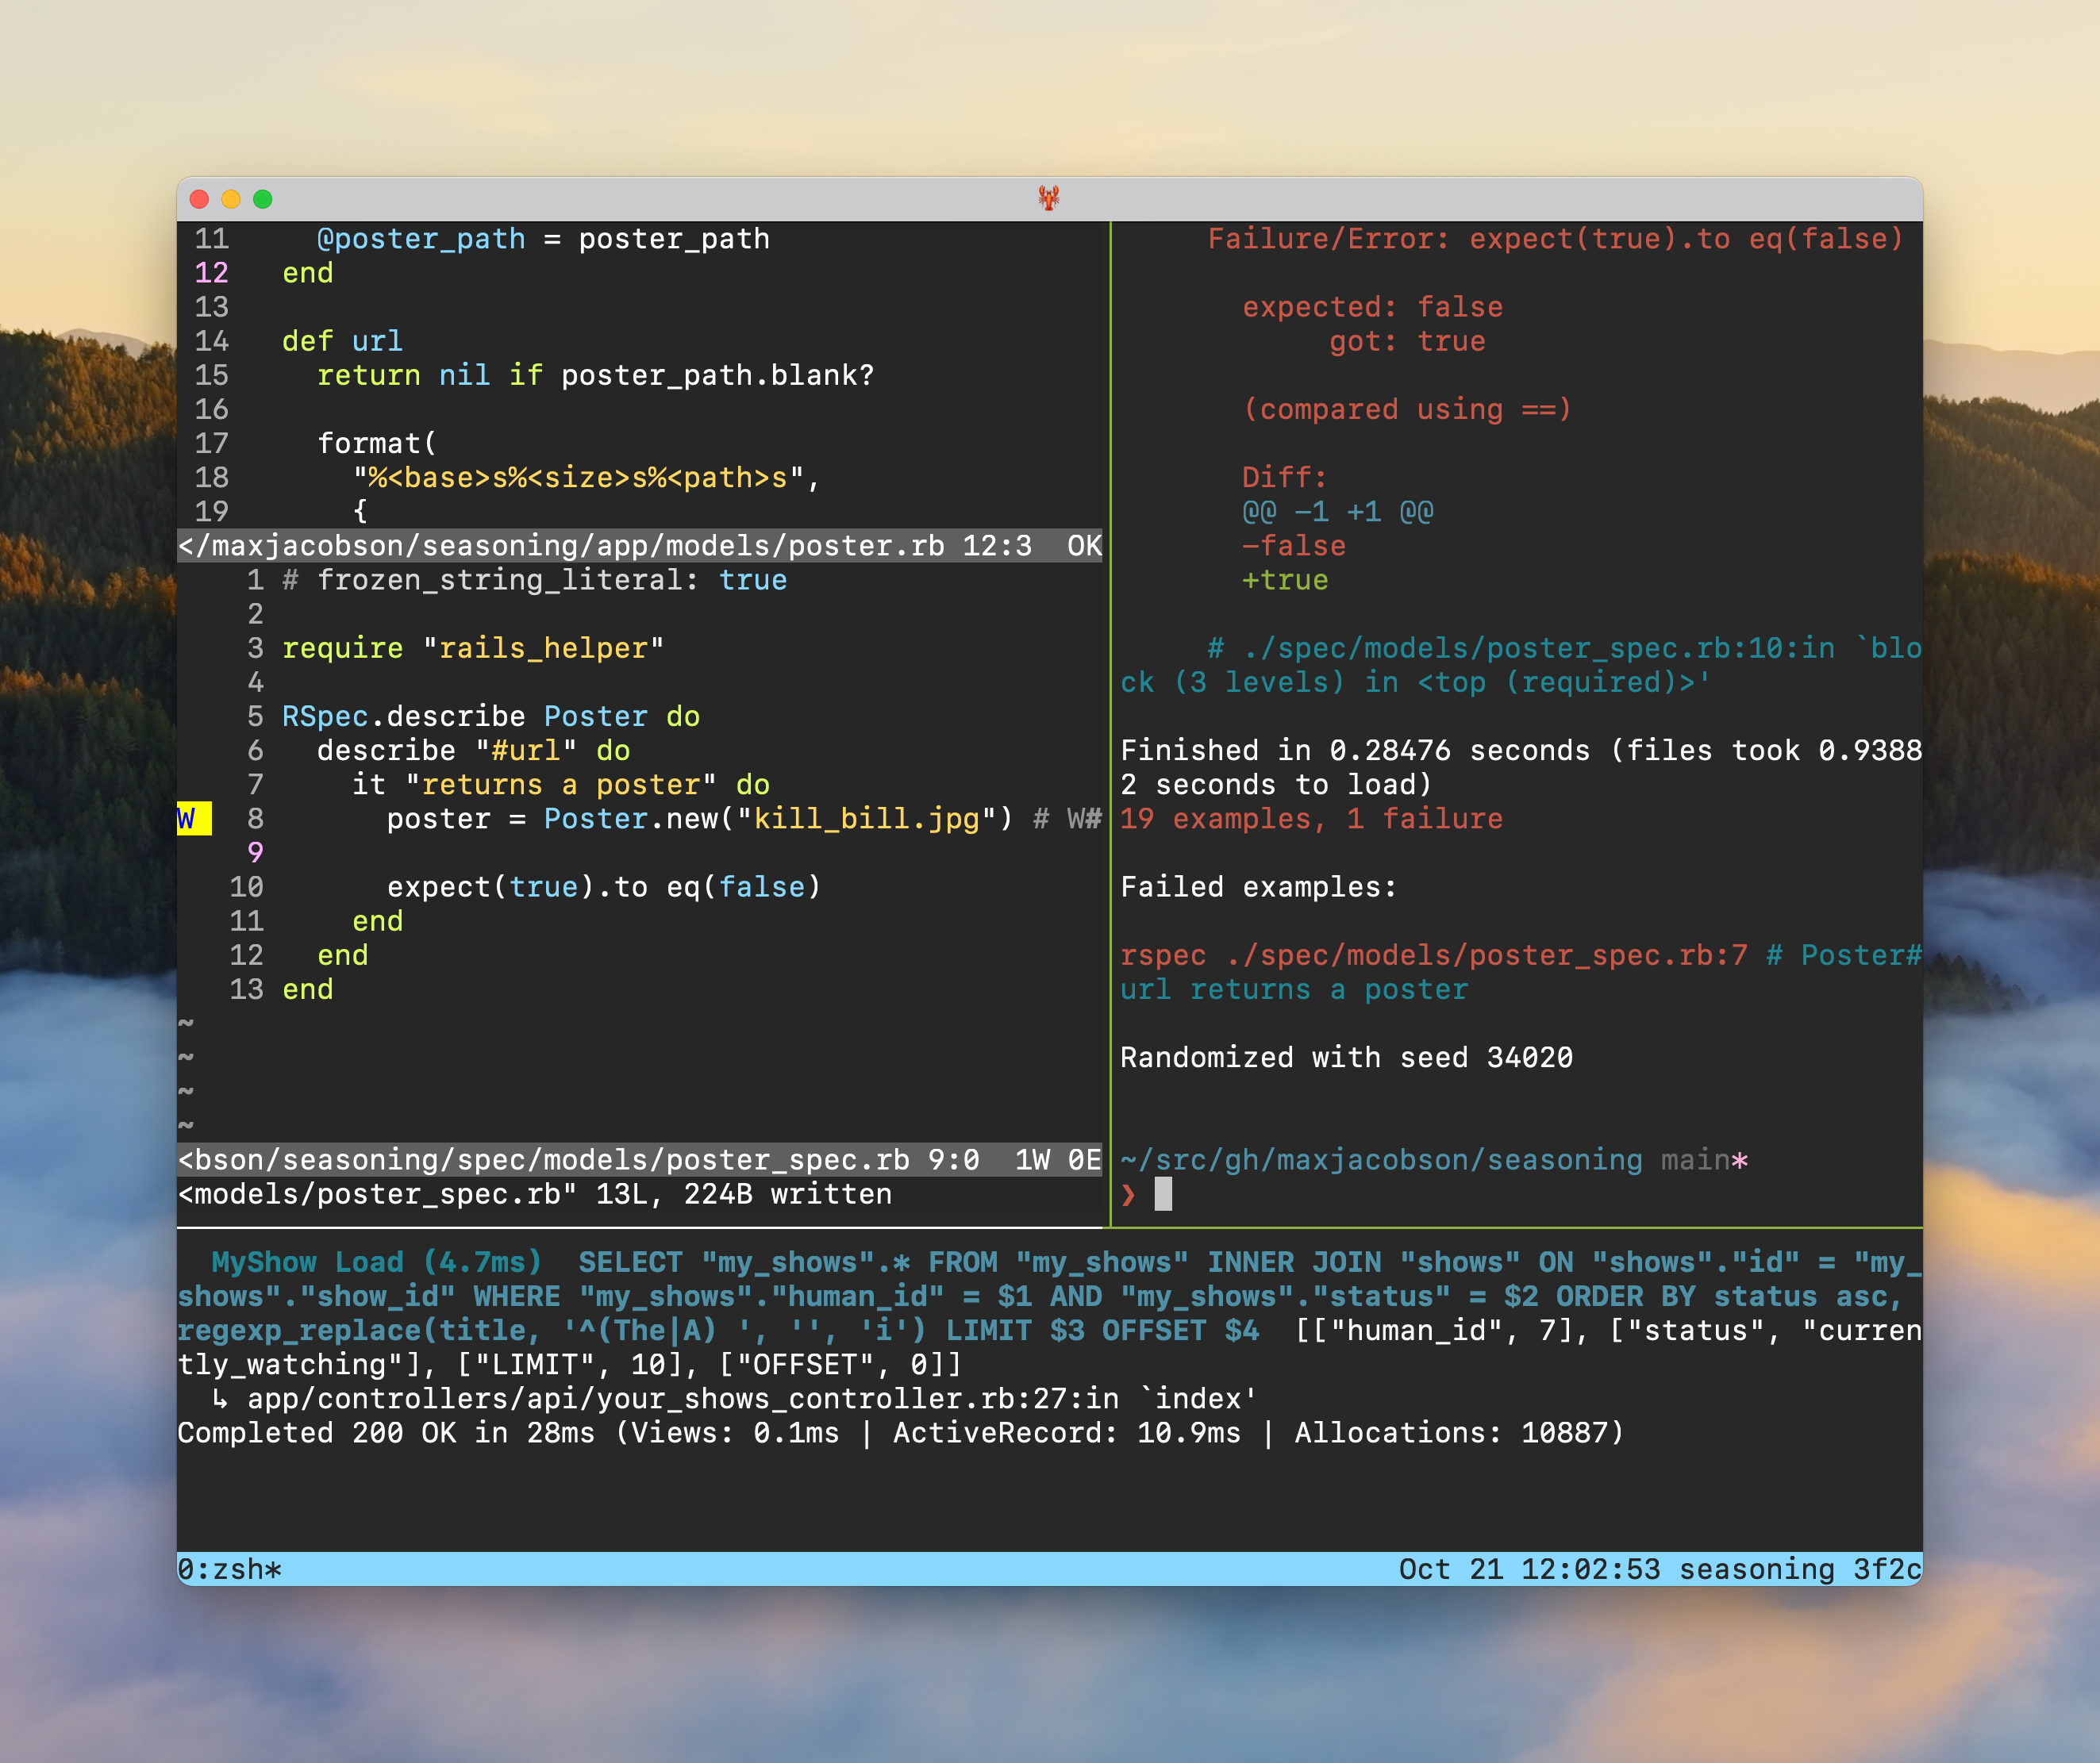 My tmux setup, with some panes showing a vim editor process, server logs, and test output